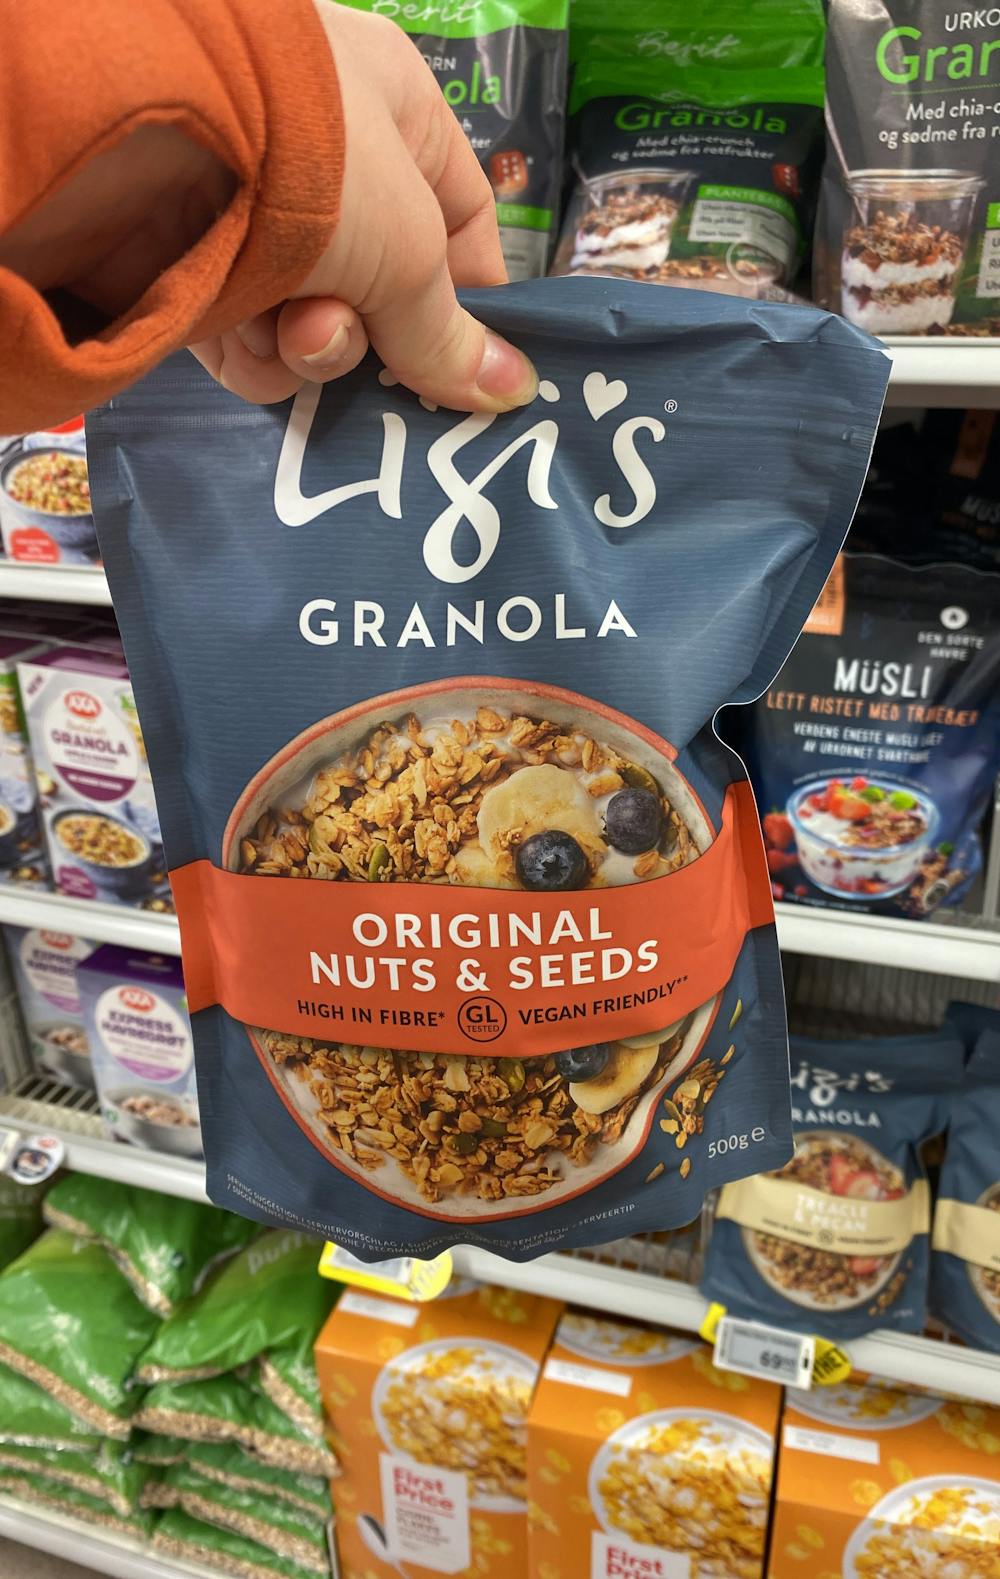 Granola - nuts and seeds, Lizis